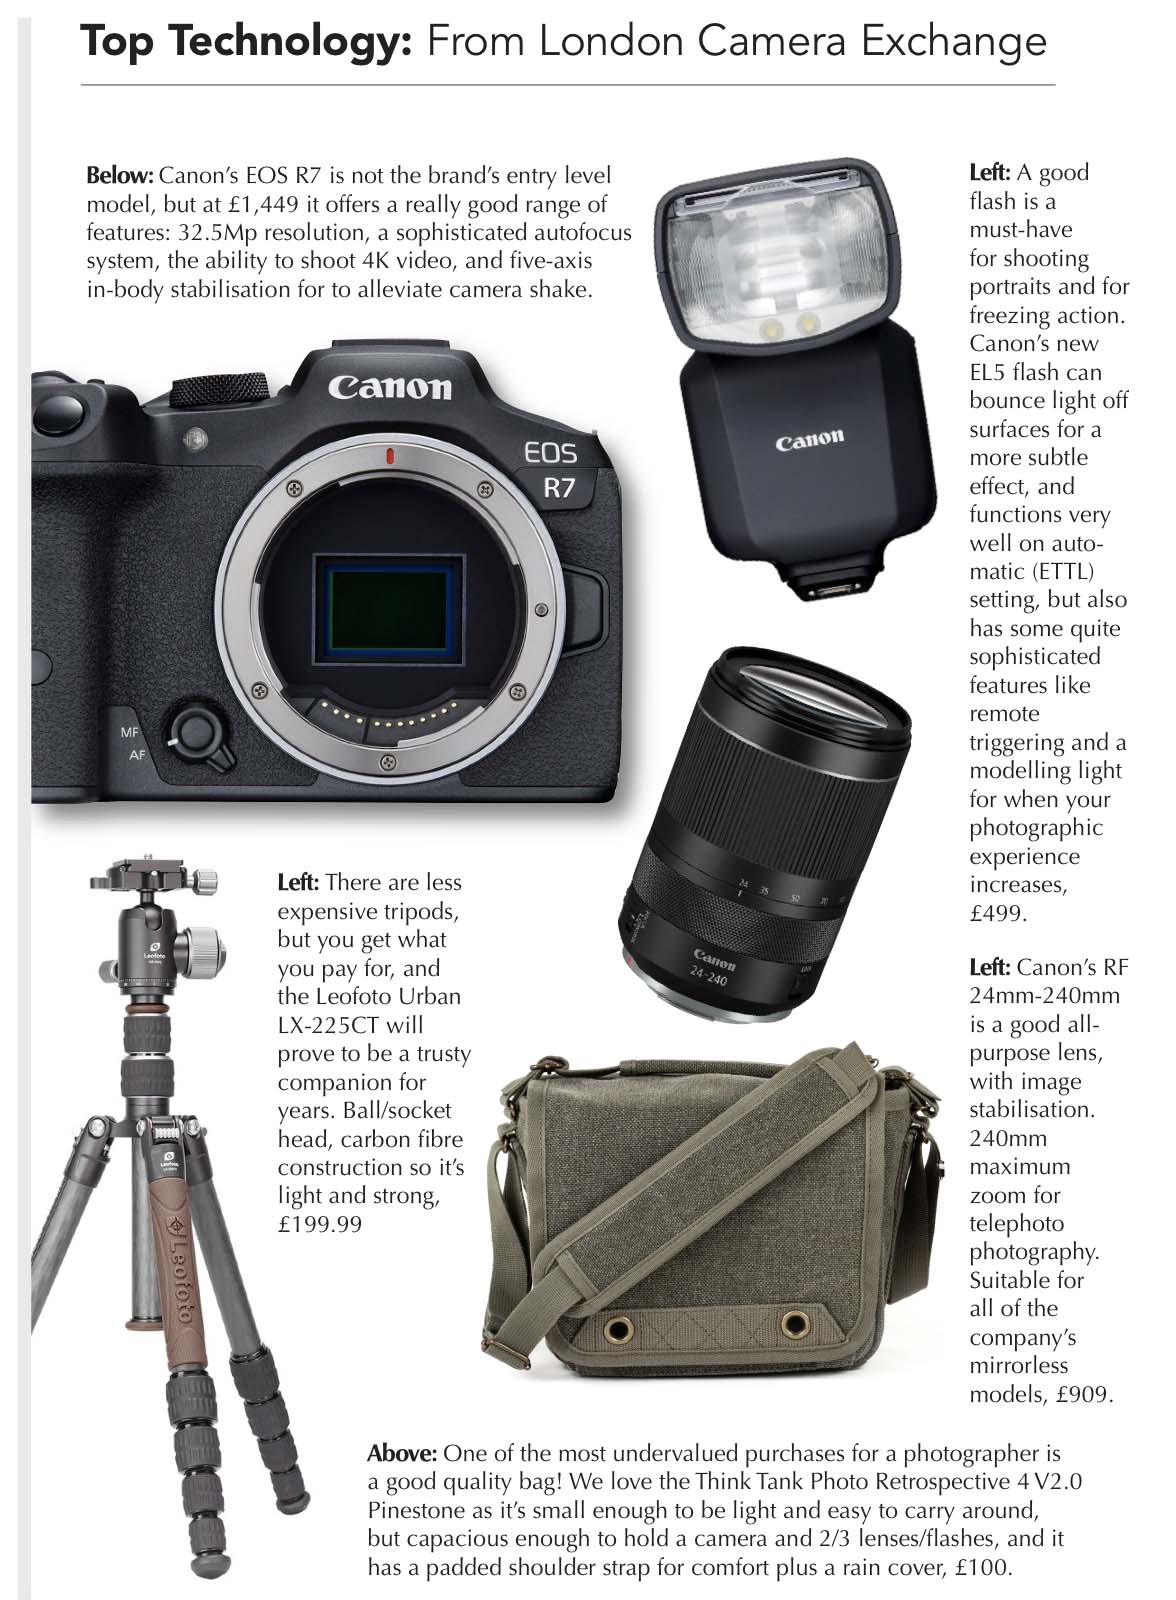 The latest camera equipment recommendations from London Camera Exchange.